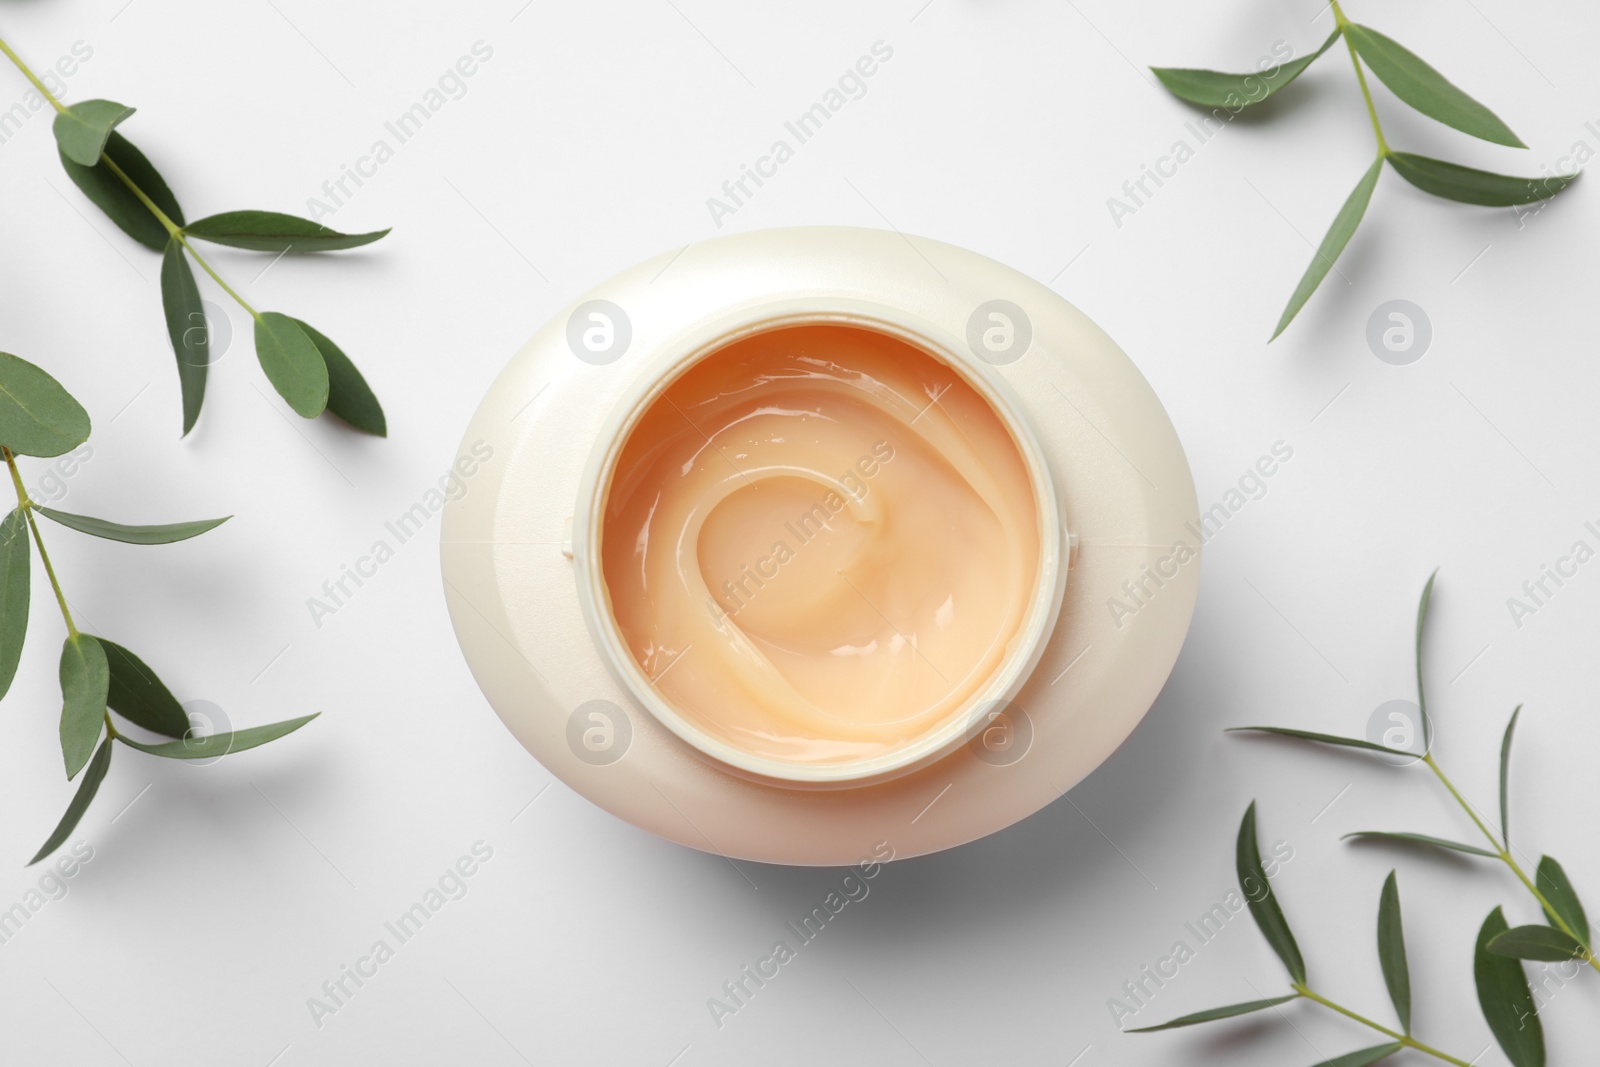 Photo of Jar of hair care cosmetic product and green leaves on white background, flat lay